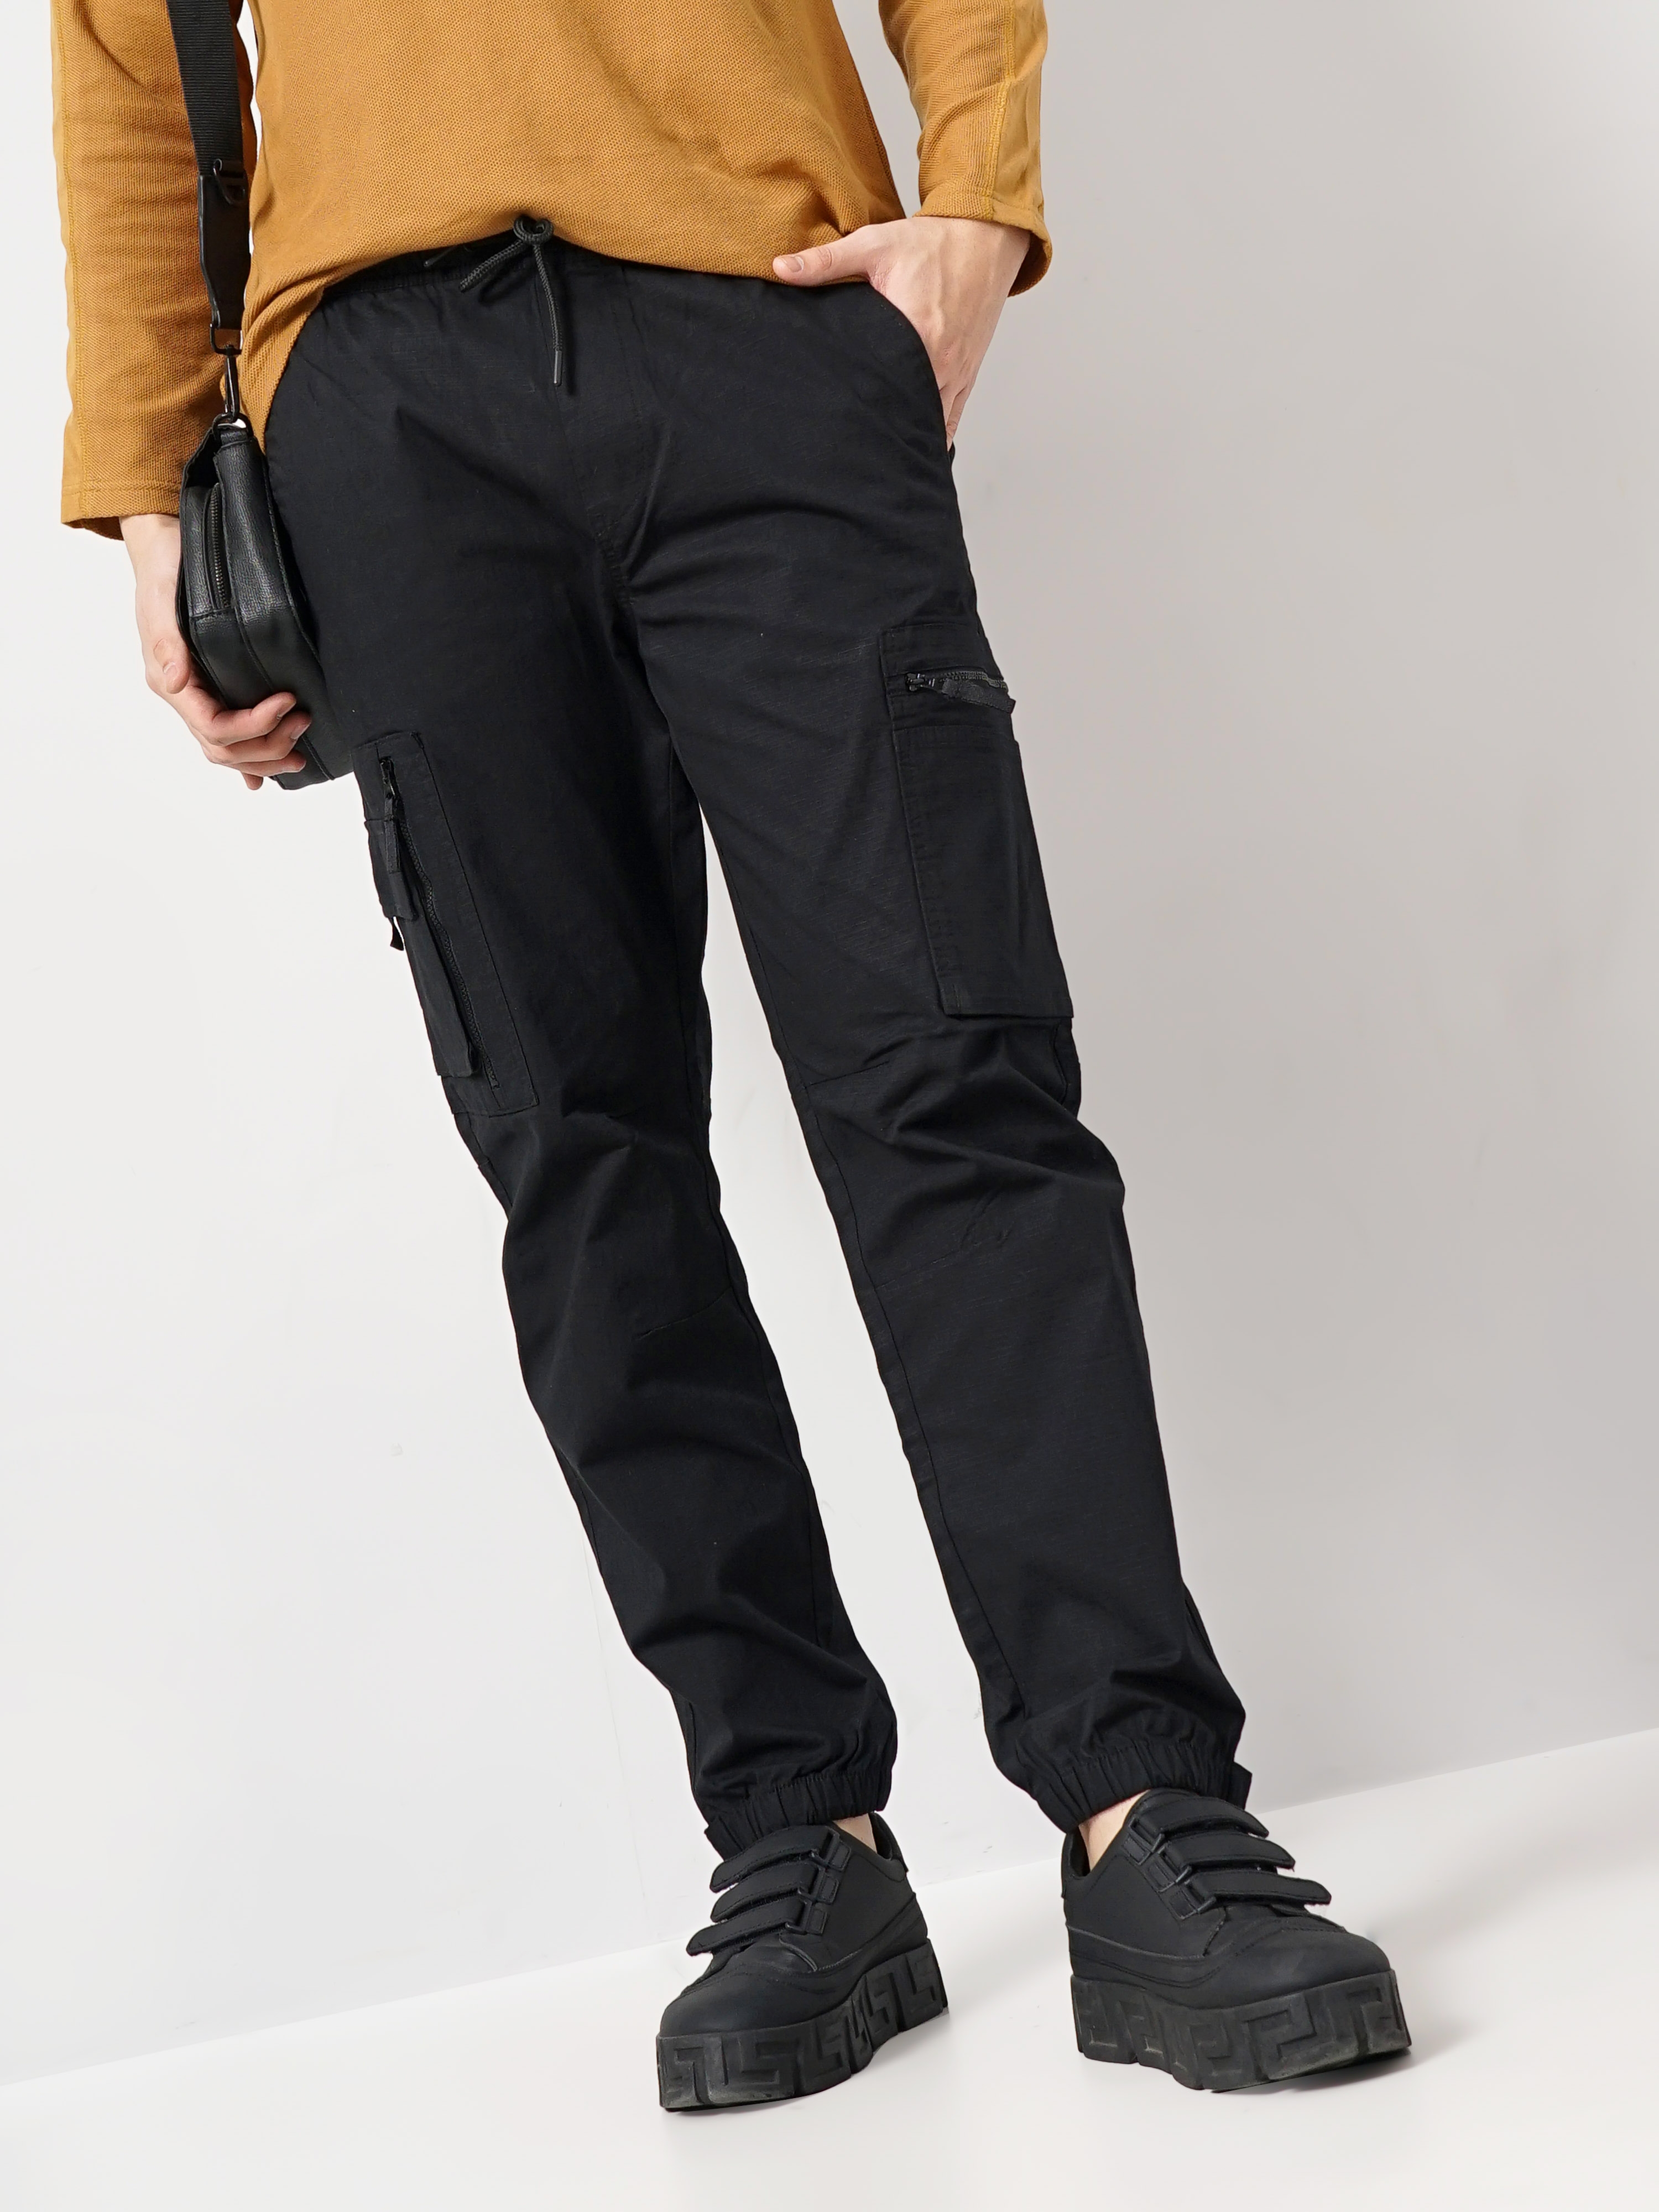 2-pack Loose Fit cargo trousers - Black/Khaki green - Kids | H&M IN